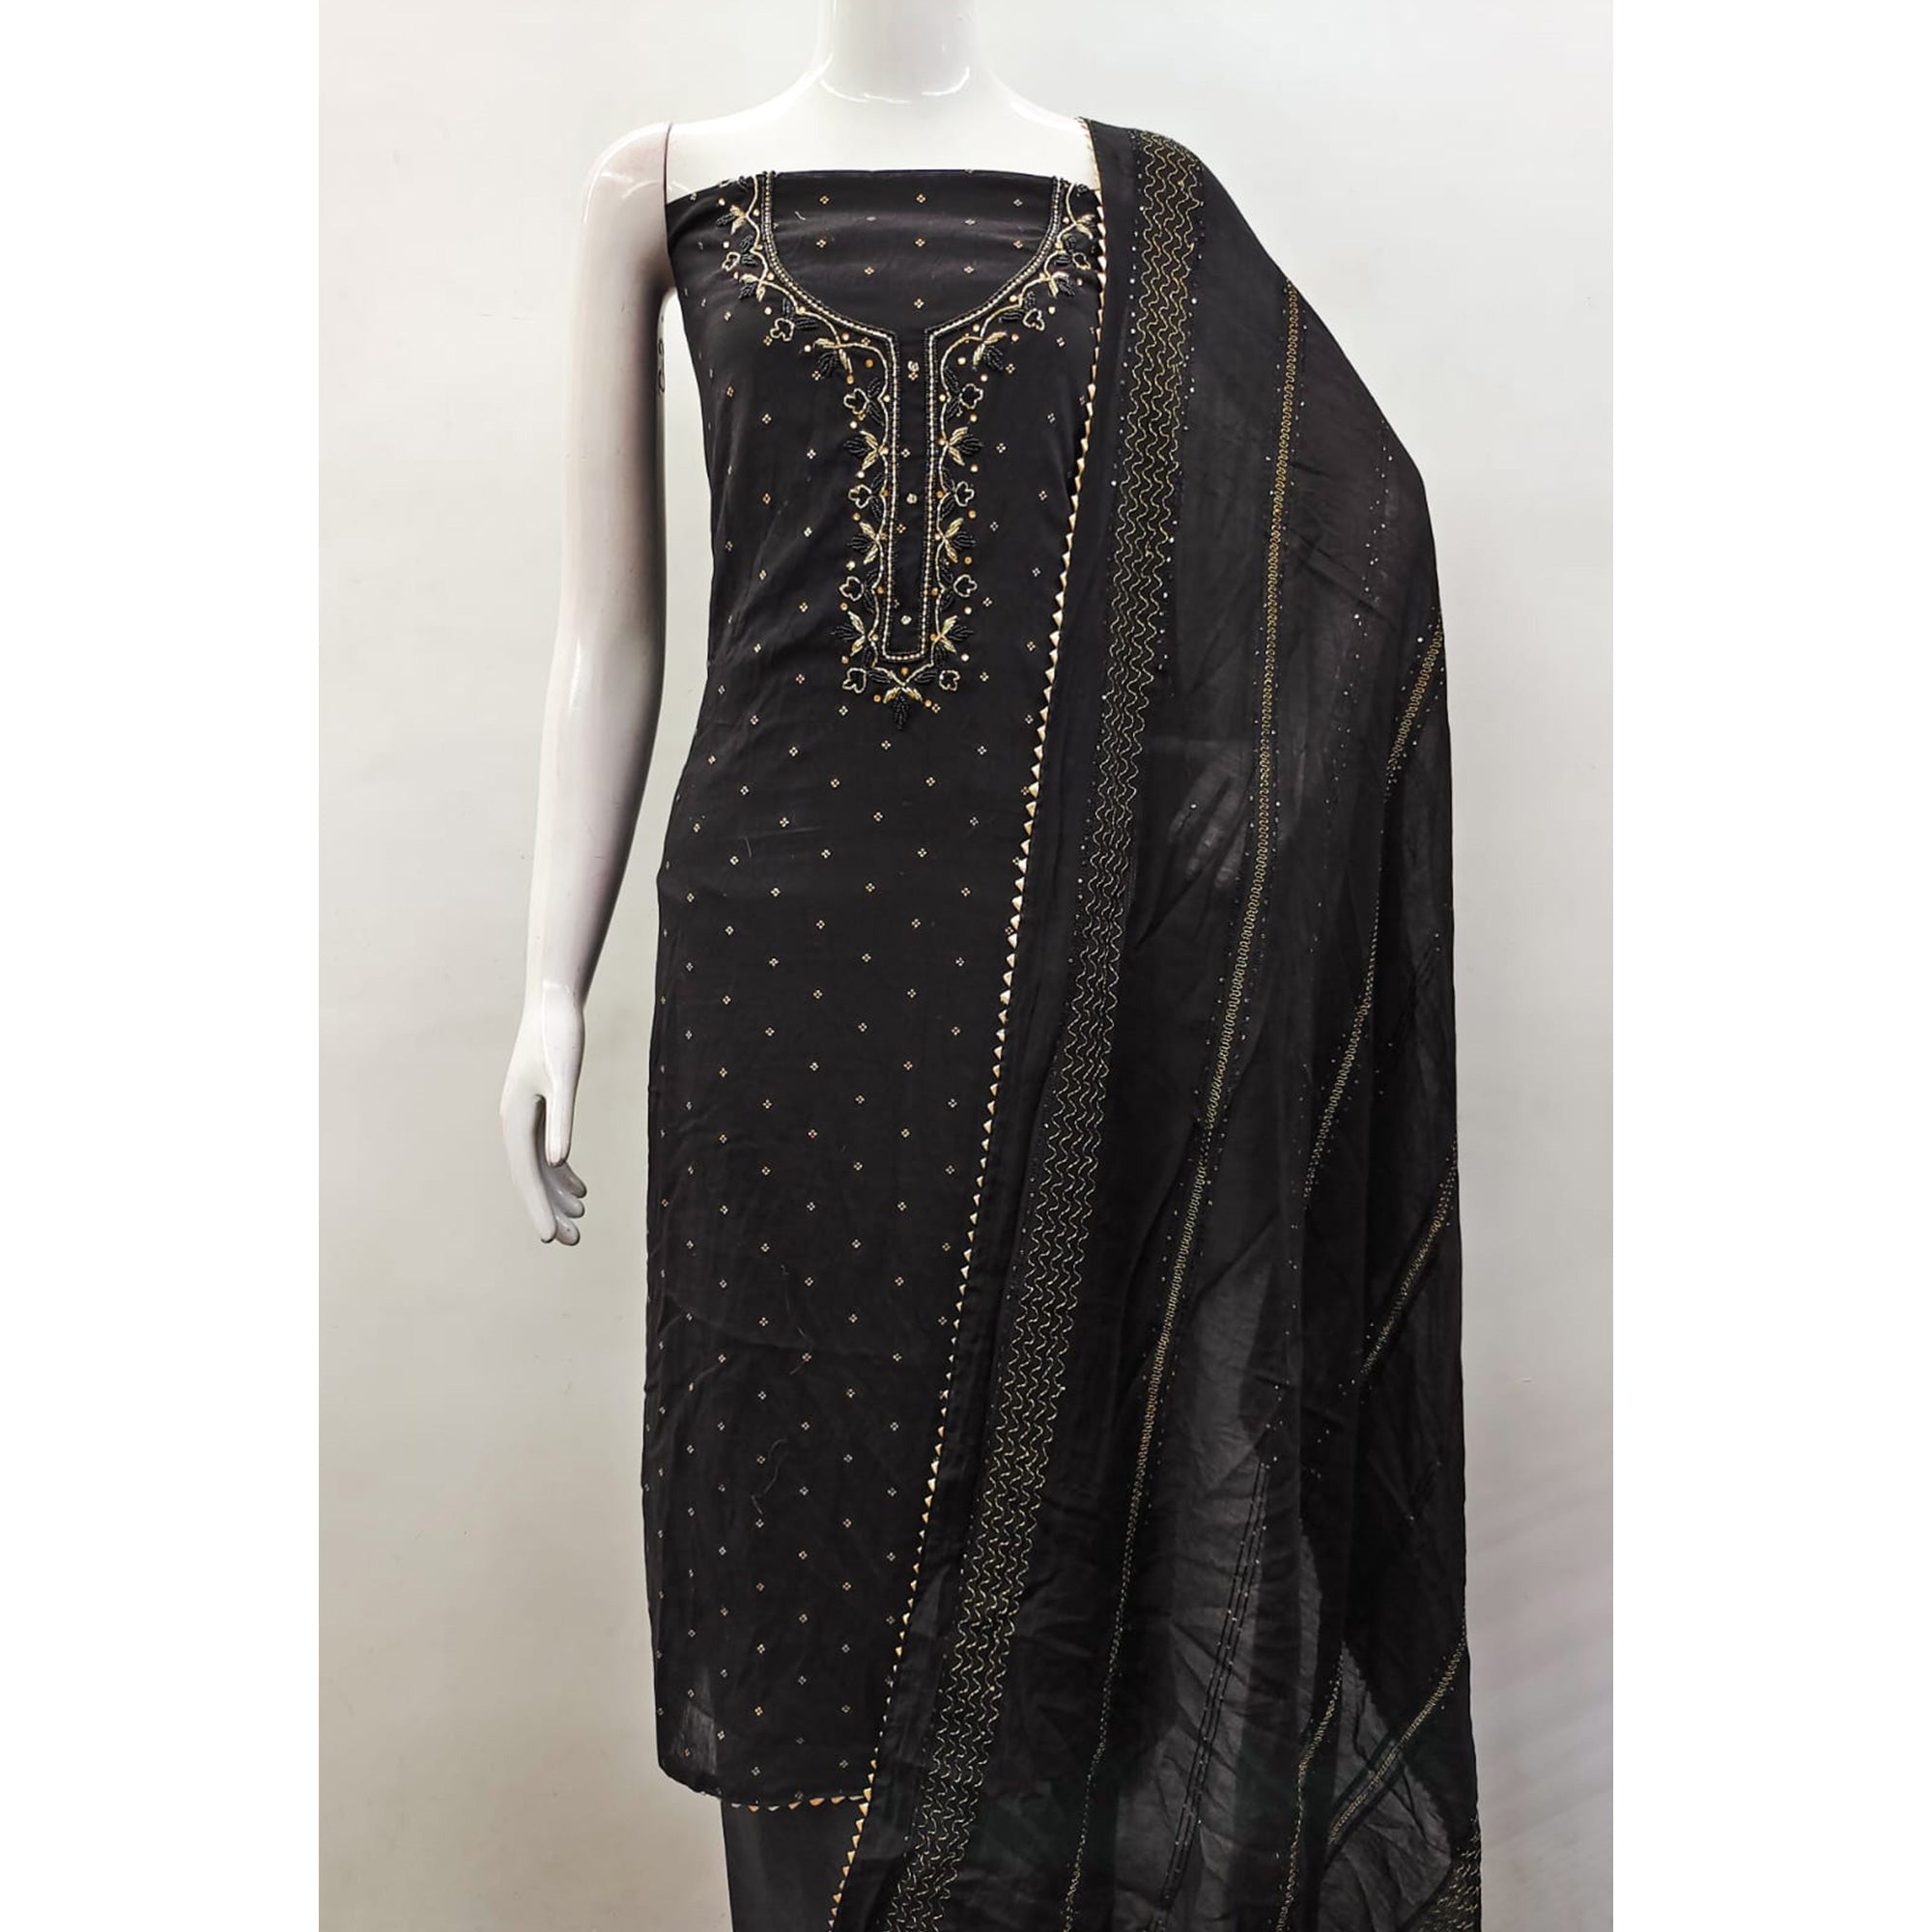 Black Butti With Hand Embroidered Jacquard Dress Material